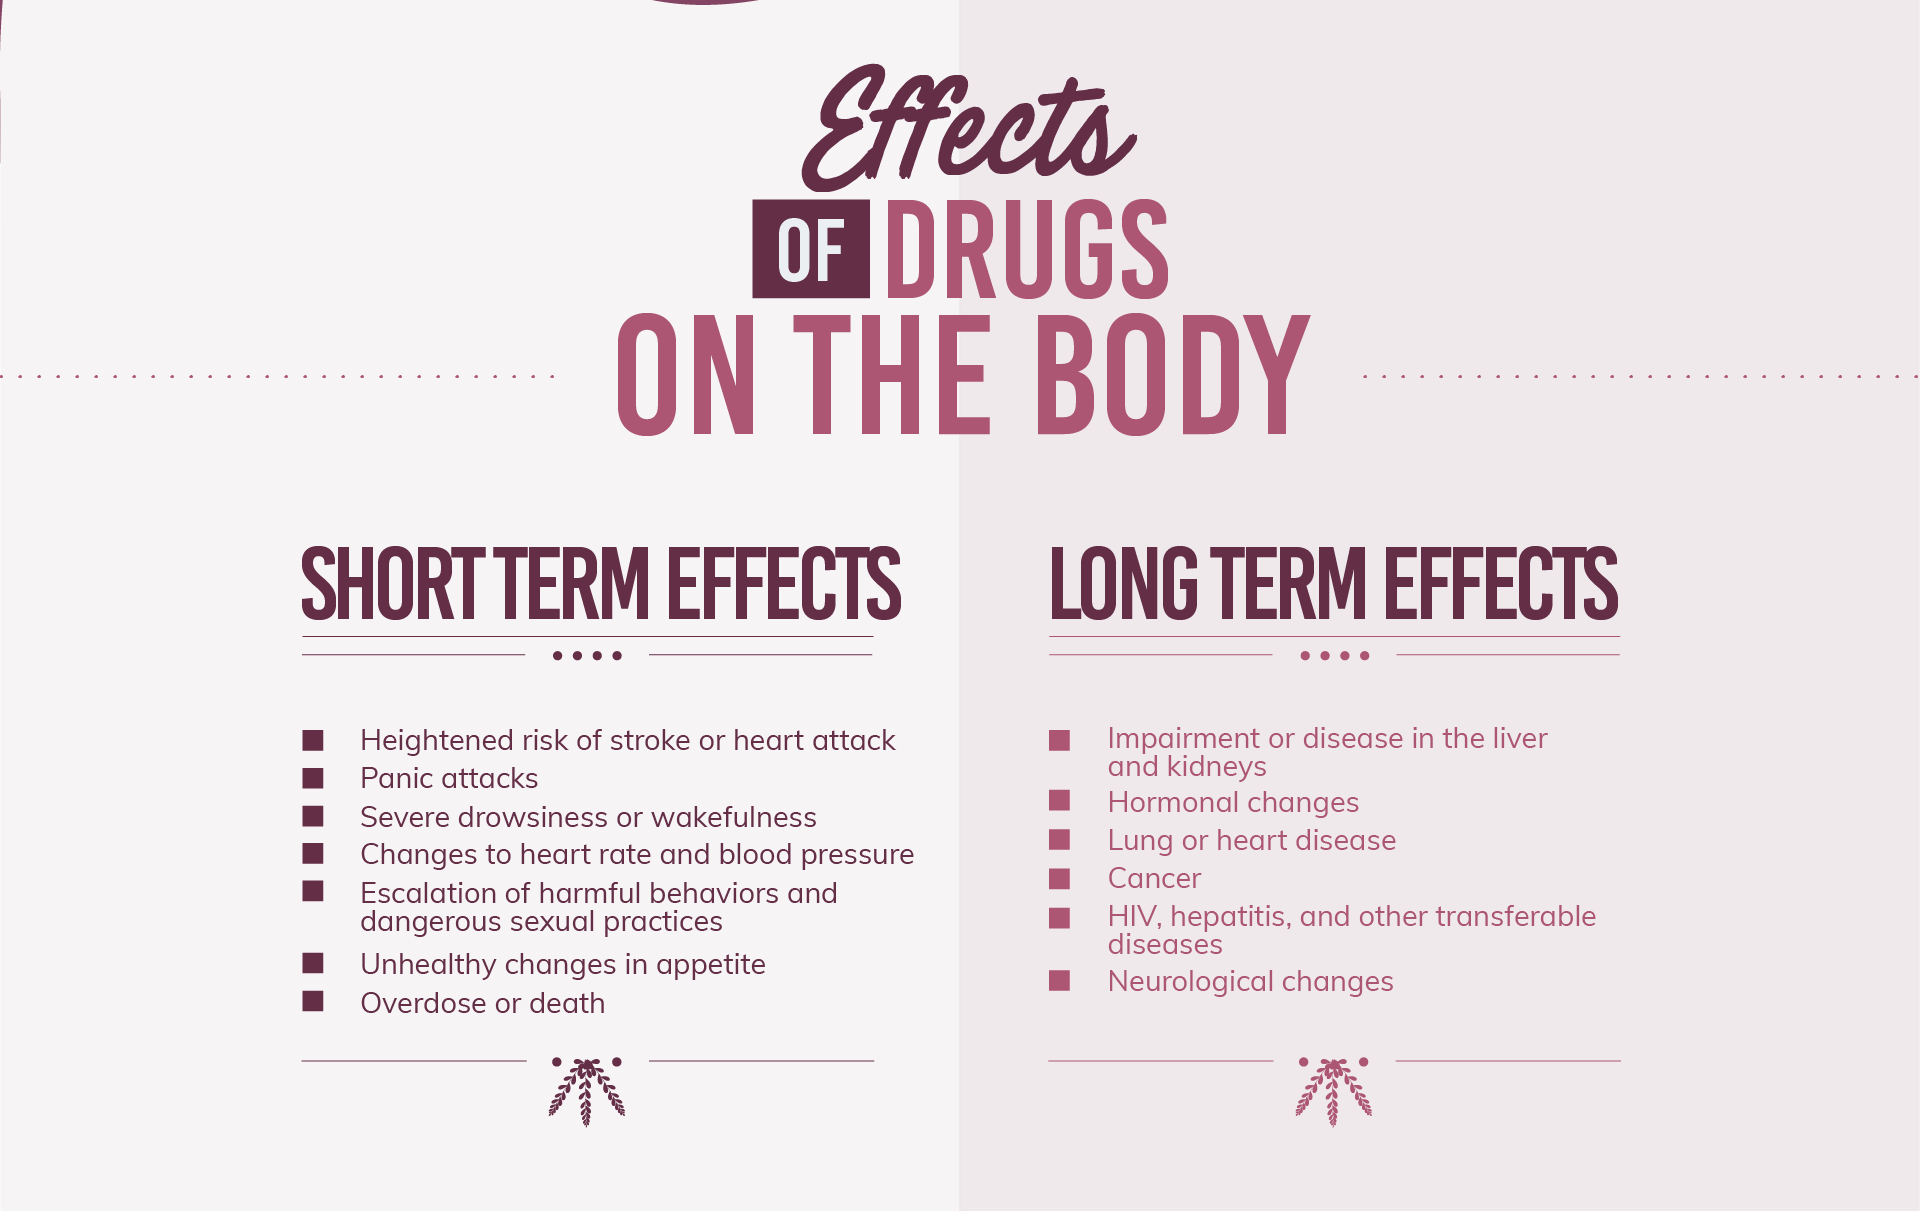 The short term effects of the drugs on the body are, heightened risk of stroke or heart attack, panic attacks, severe drowsiness or wakefulness, changes to heart rate abd blood pressure, escalation of harmful behaviors and dangerous sexual practices, unhealthy changes in appetite and overdose or death.The long tern effects of the drugs on the body are, impairment or disease in the liver and kidneys, hormonal changes, lung or heart disease, cancer, HIV, hepatitis and other transferable diseases and neurological changes.